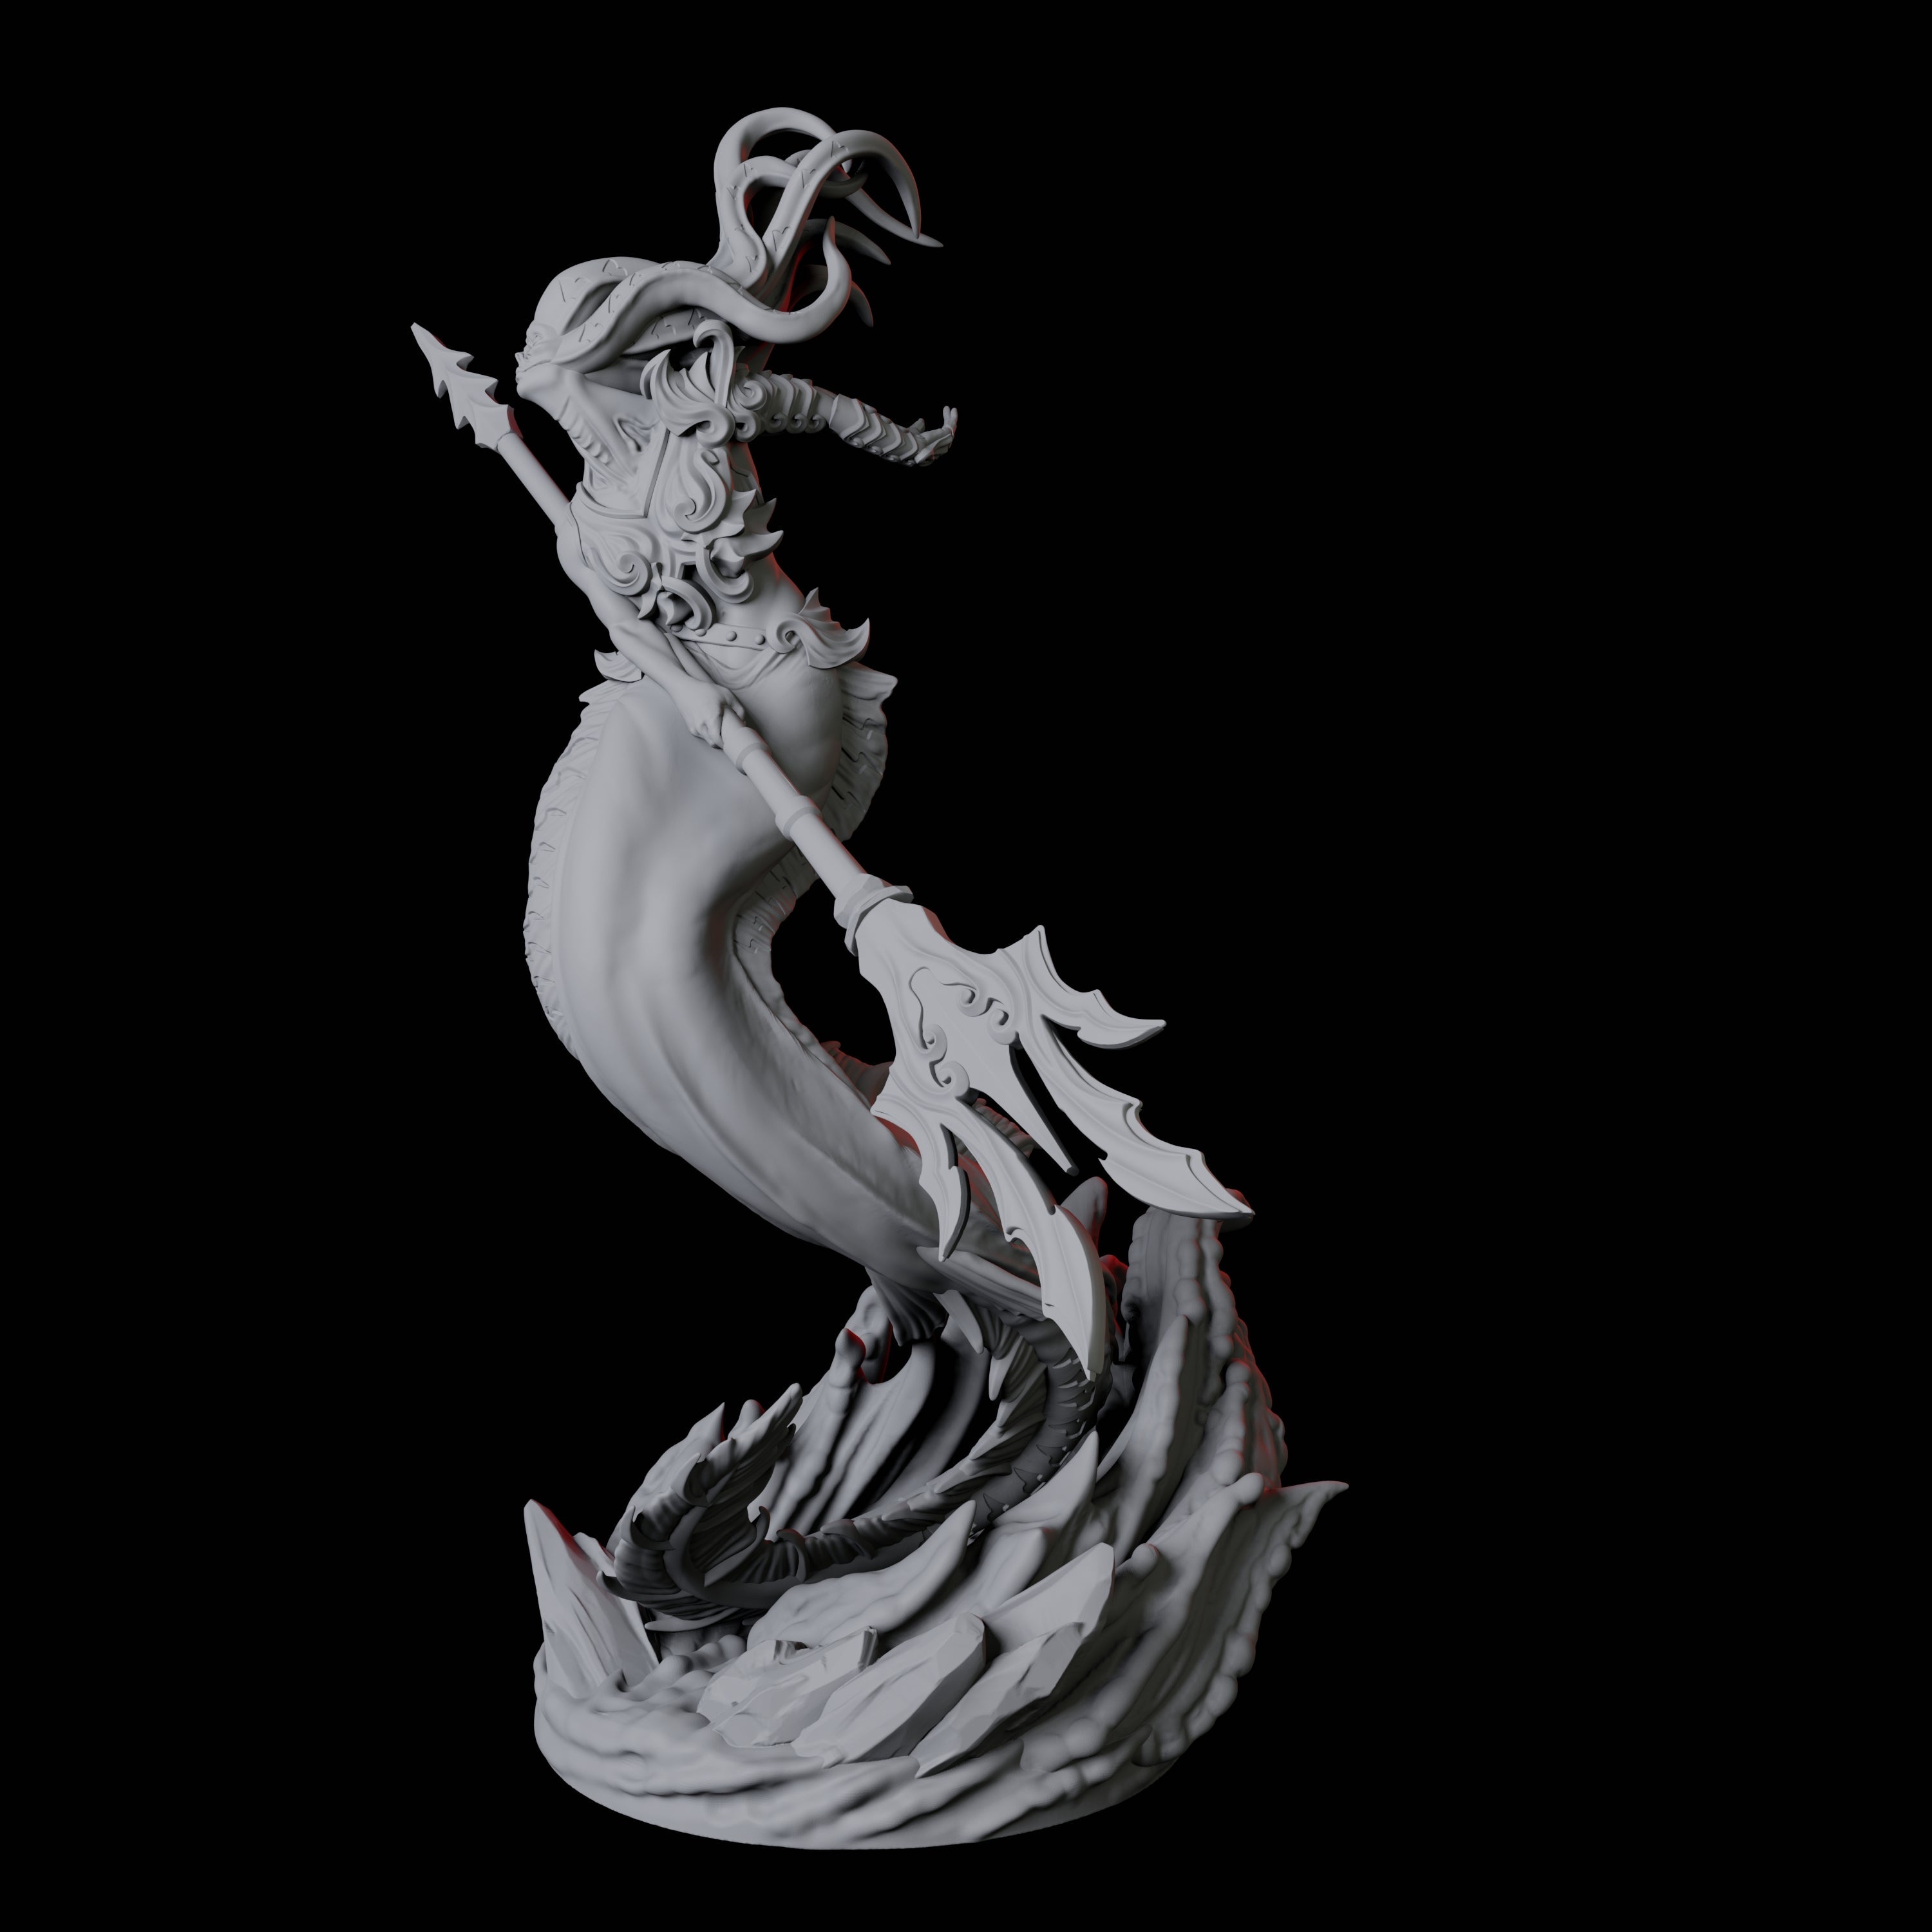 Four Screeching Harpies Miniature for Dungeons and Dragons, Pathfinder or other TTRPGs